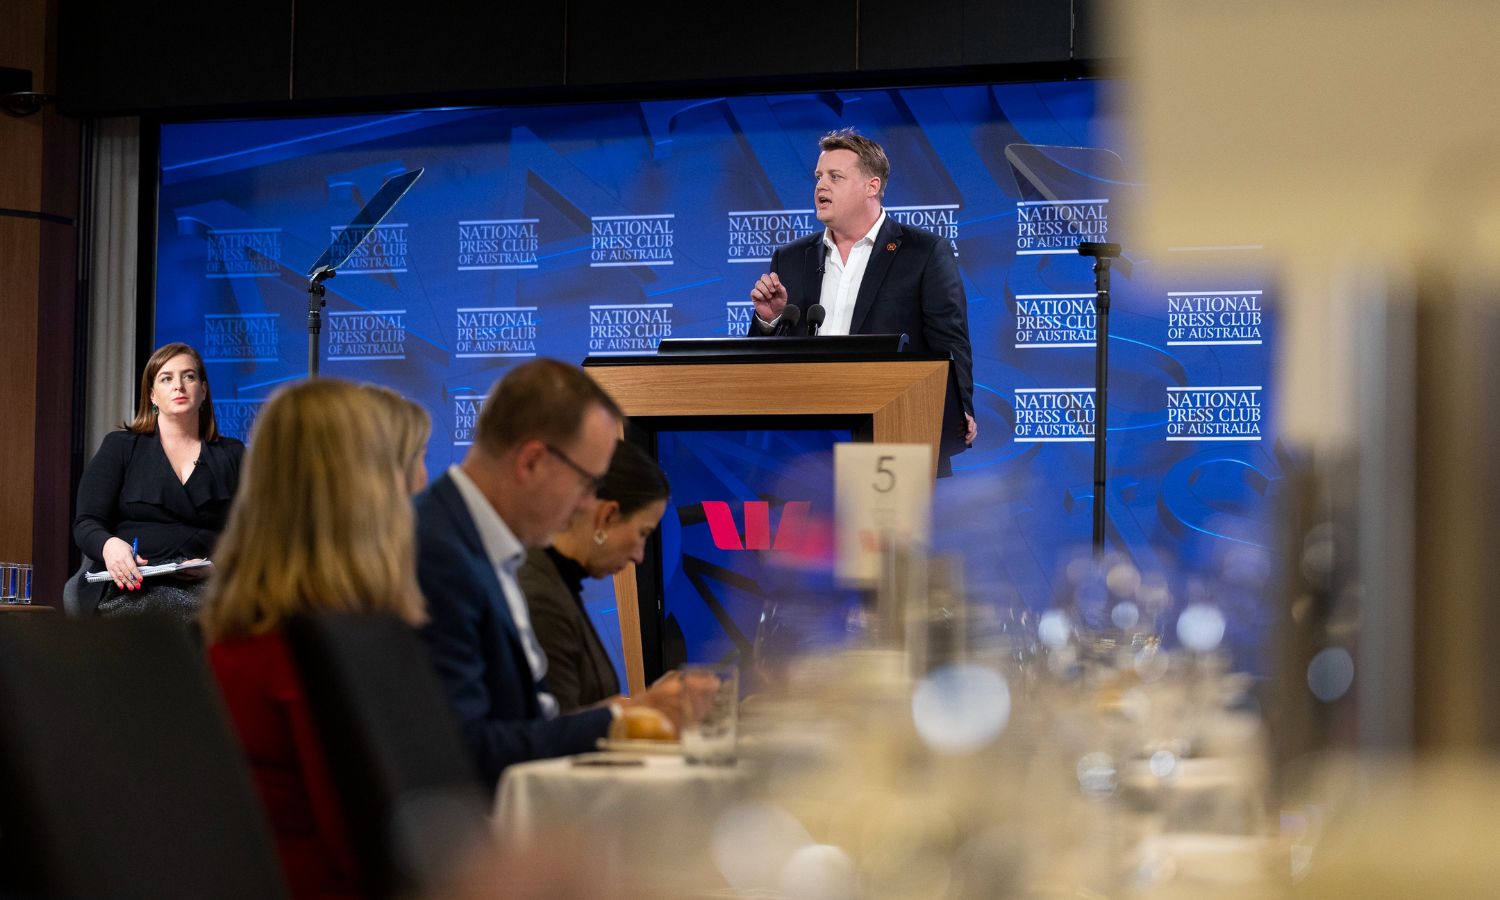 An image of Zach Smith from the CFMEU speaking at the National Press Club.